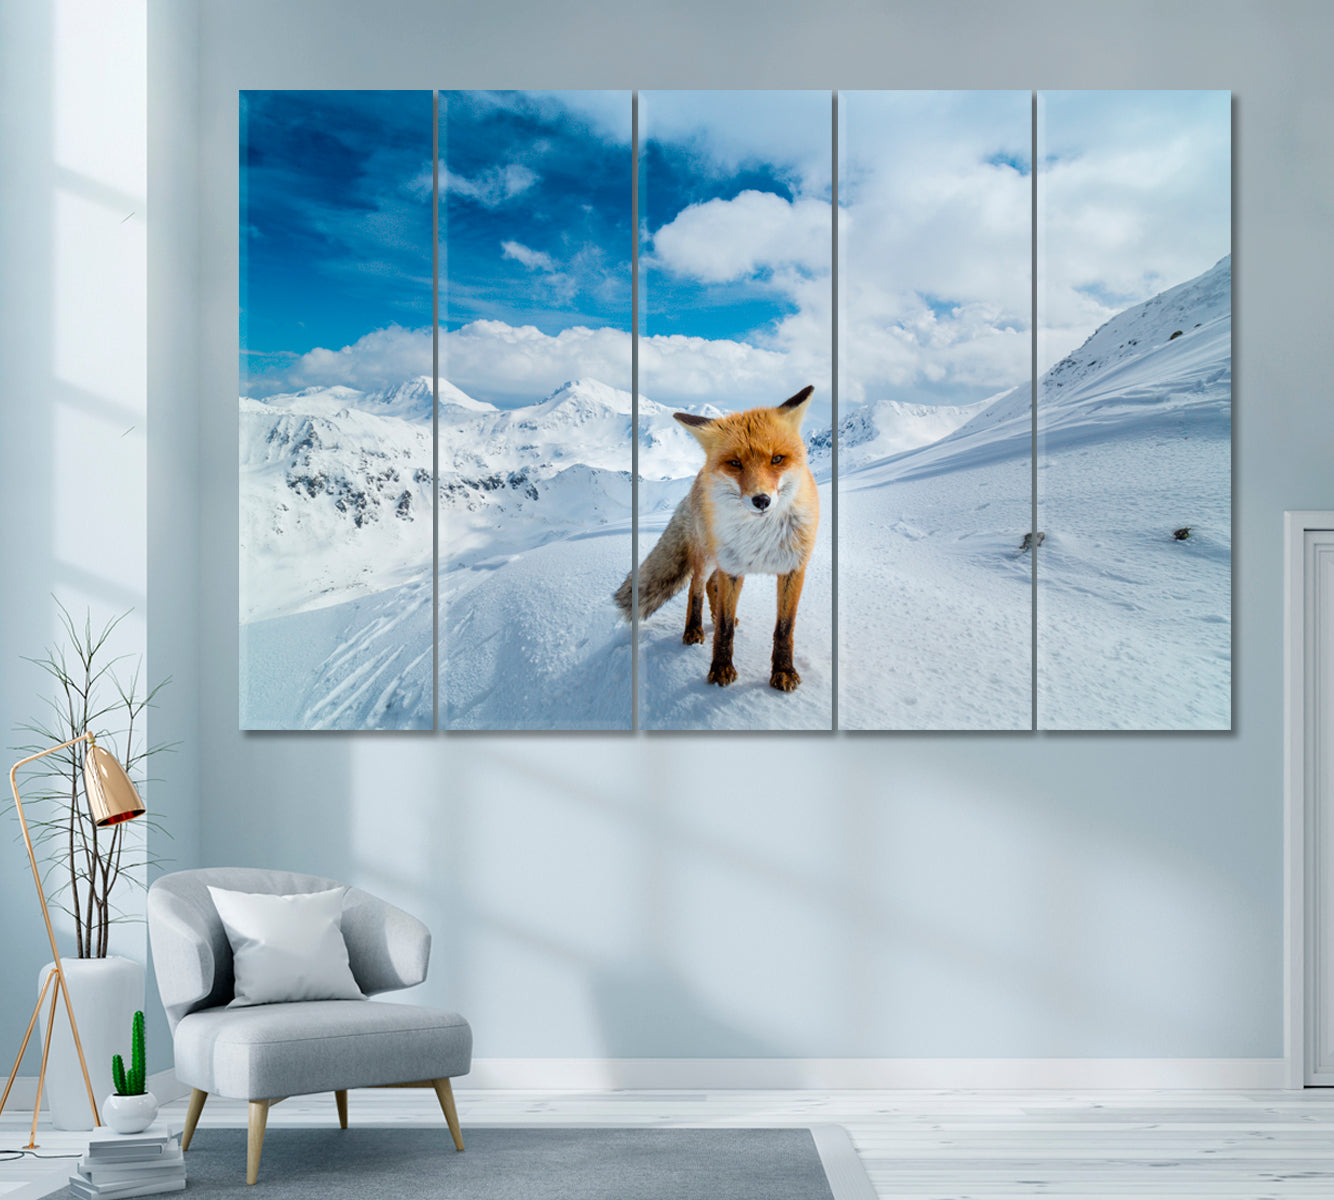 Red Fox in Alps Canvas Print ArtLexy 5 Panels 36"x24" inches 